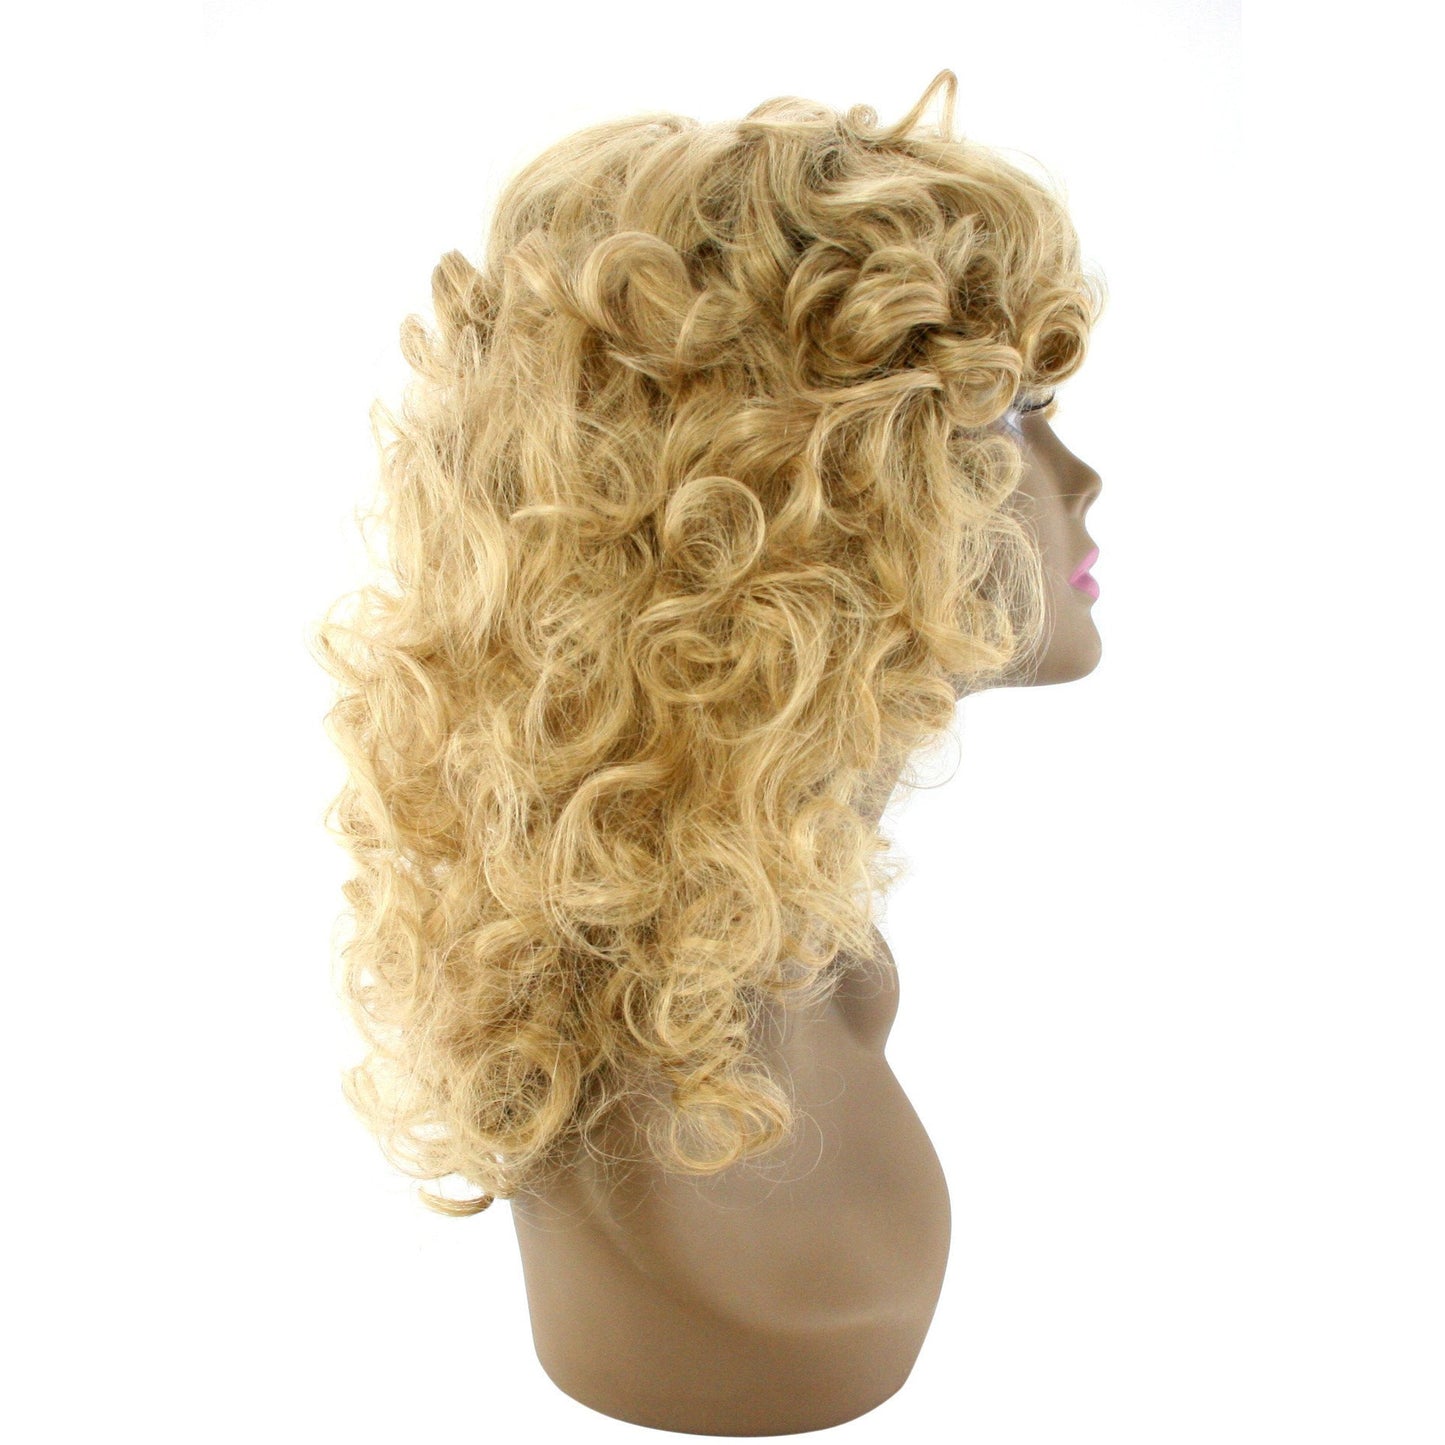 Unique's 100% Human Hair Full Wig / Style "K" - BeautyGiant USA